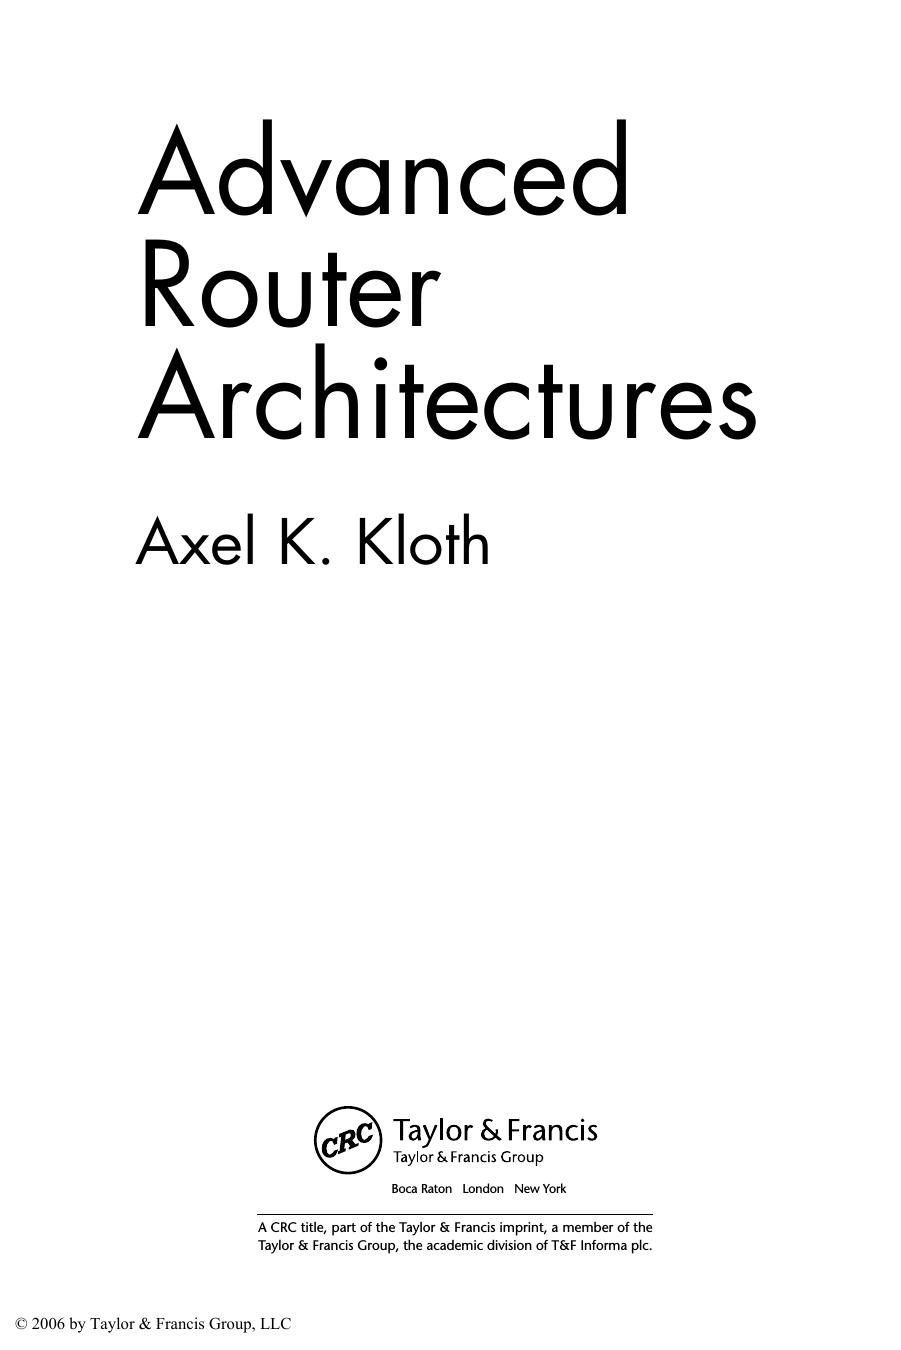 Advanced Router Architectures